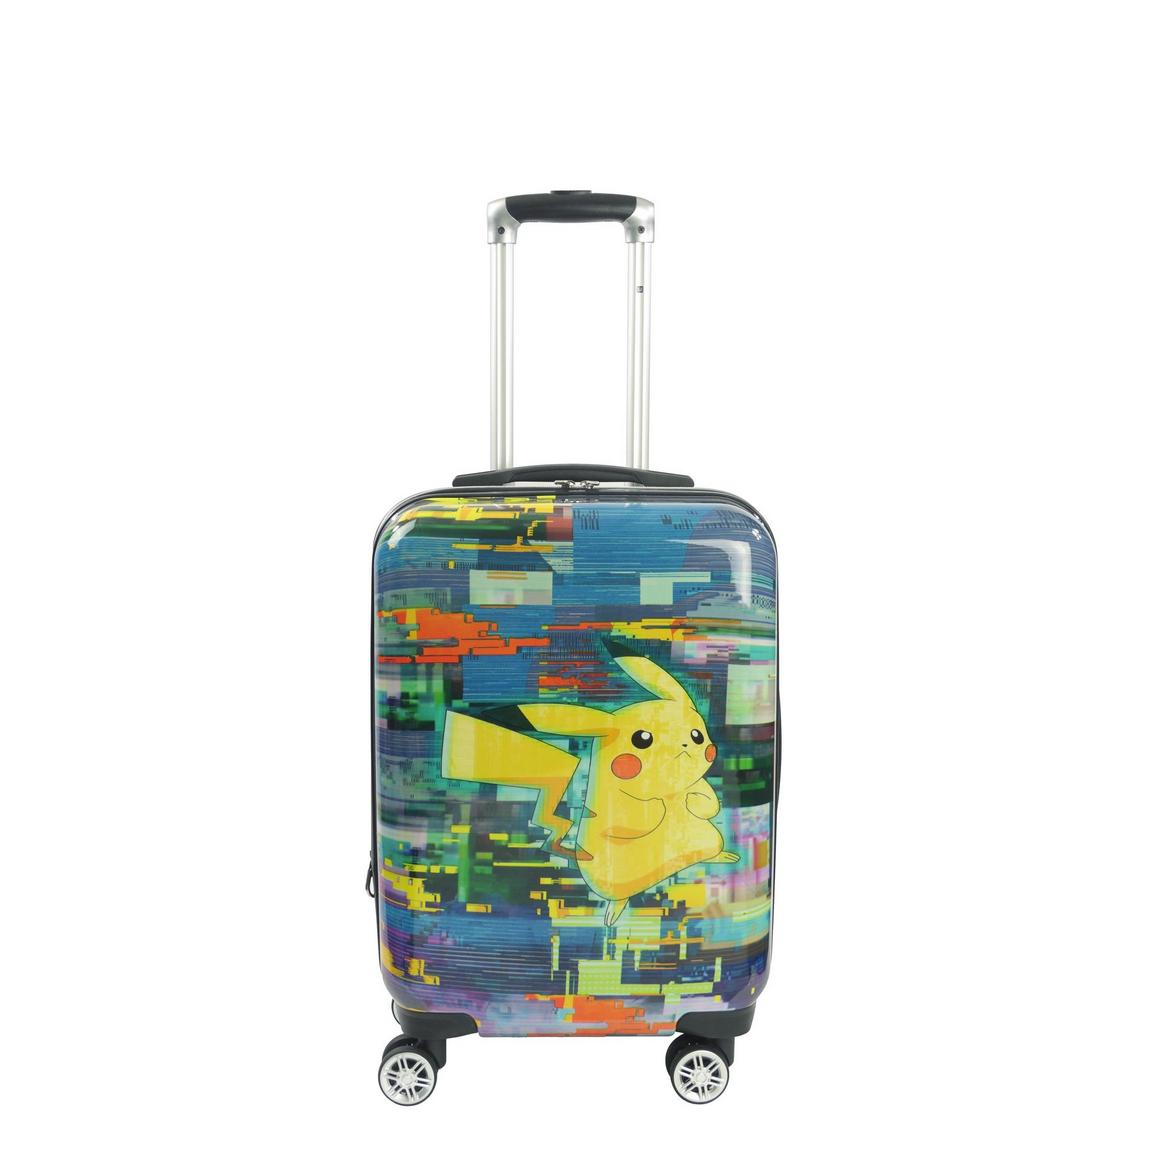 Concept One Pokemon FUL 21-in Hard-Sided Luggage